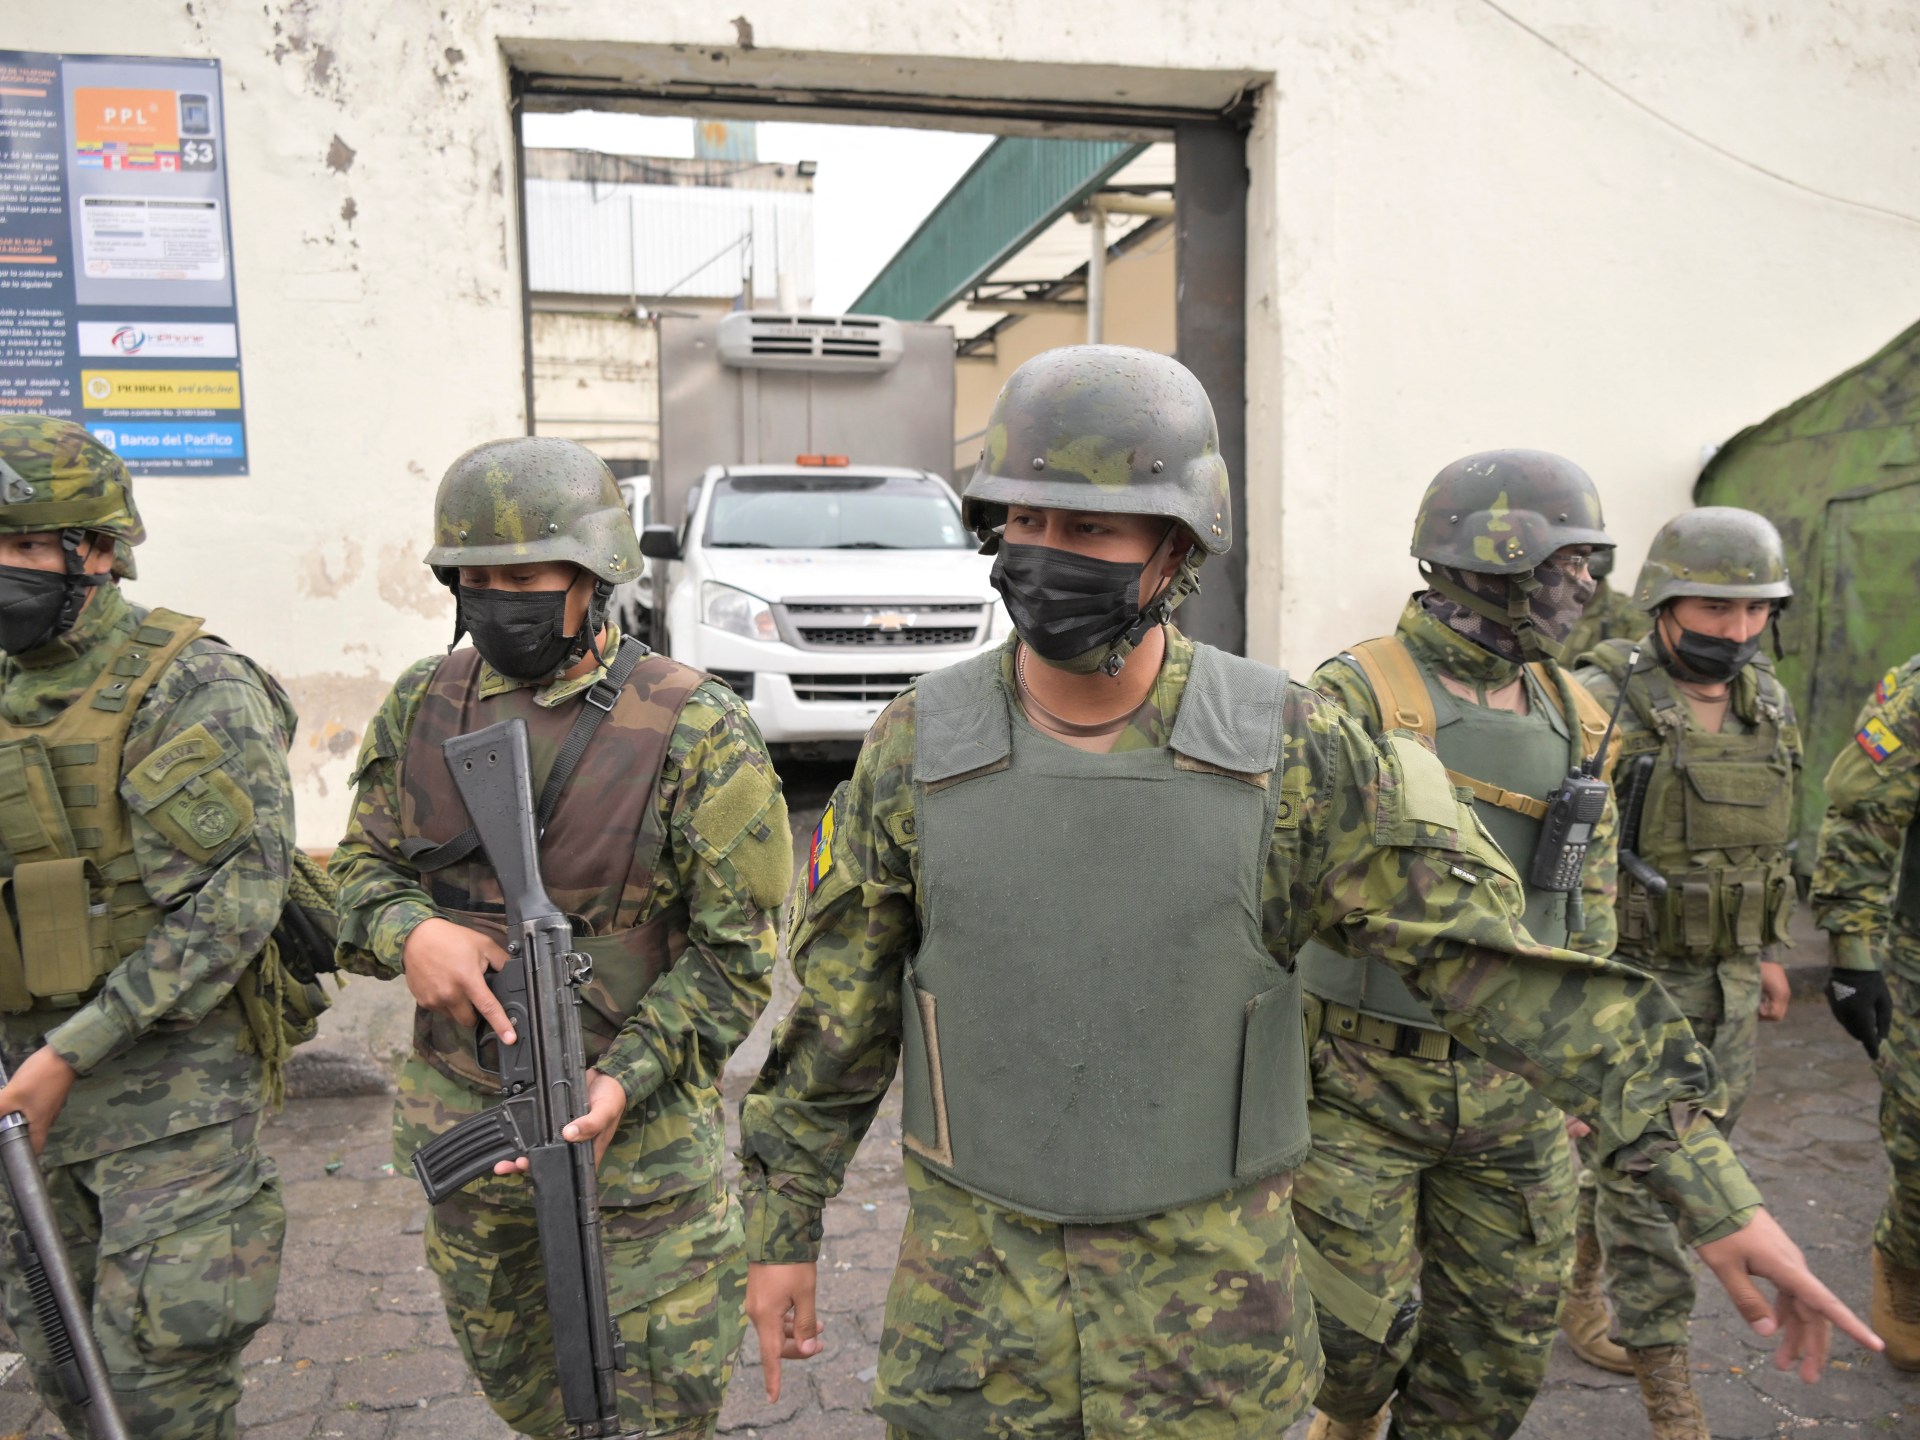 Ten killed as gang bosses’ switch sparks jail riot in Ecuador